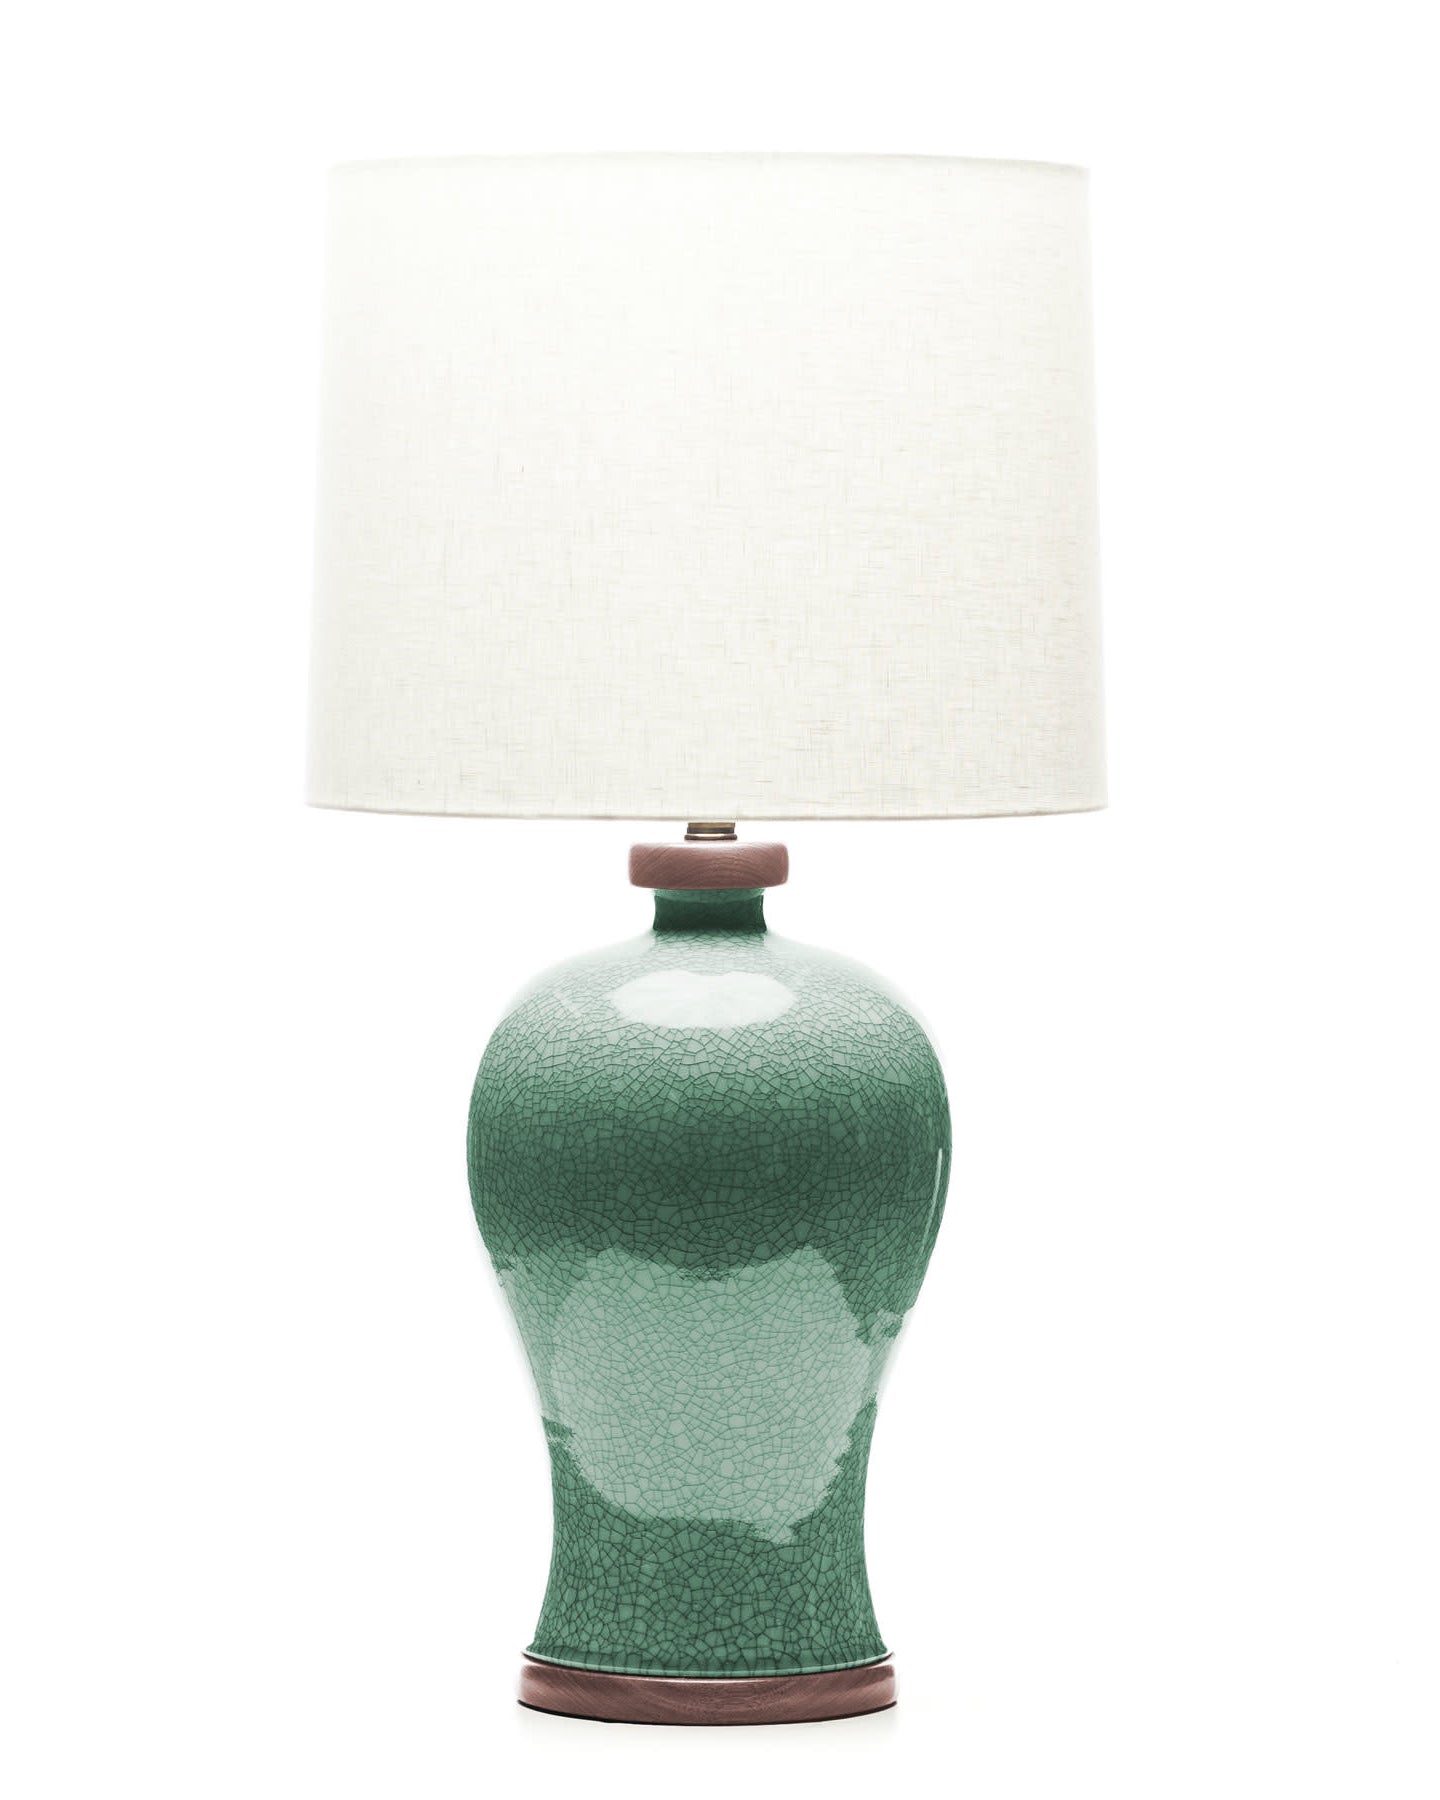 Lawrence & Scott Dashiell Table Lamp in Aquamarine Crackle with Sapele Base